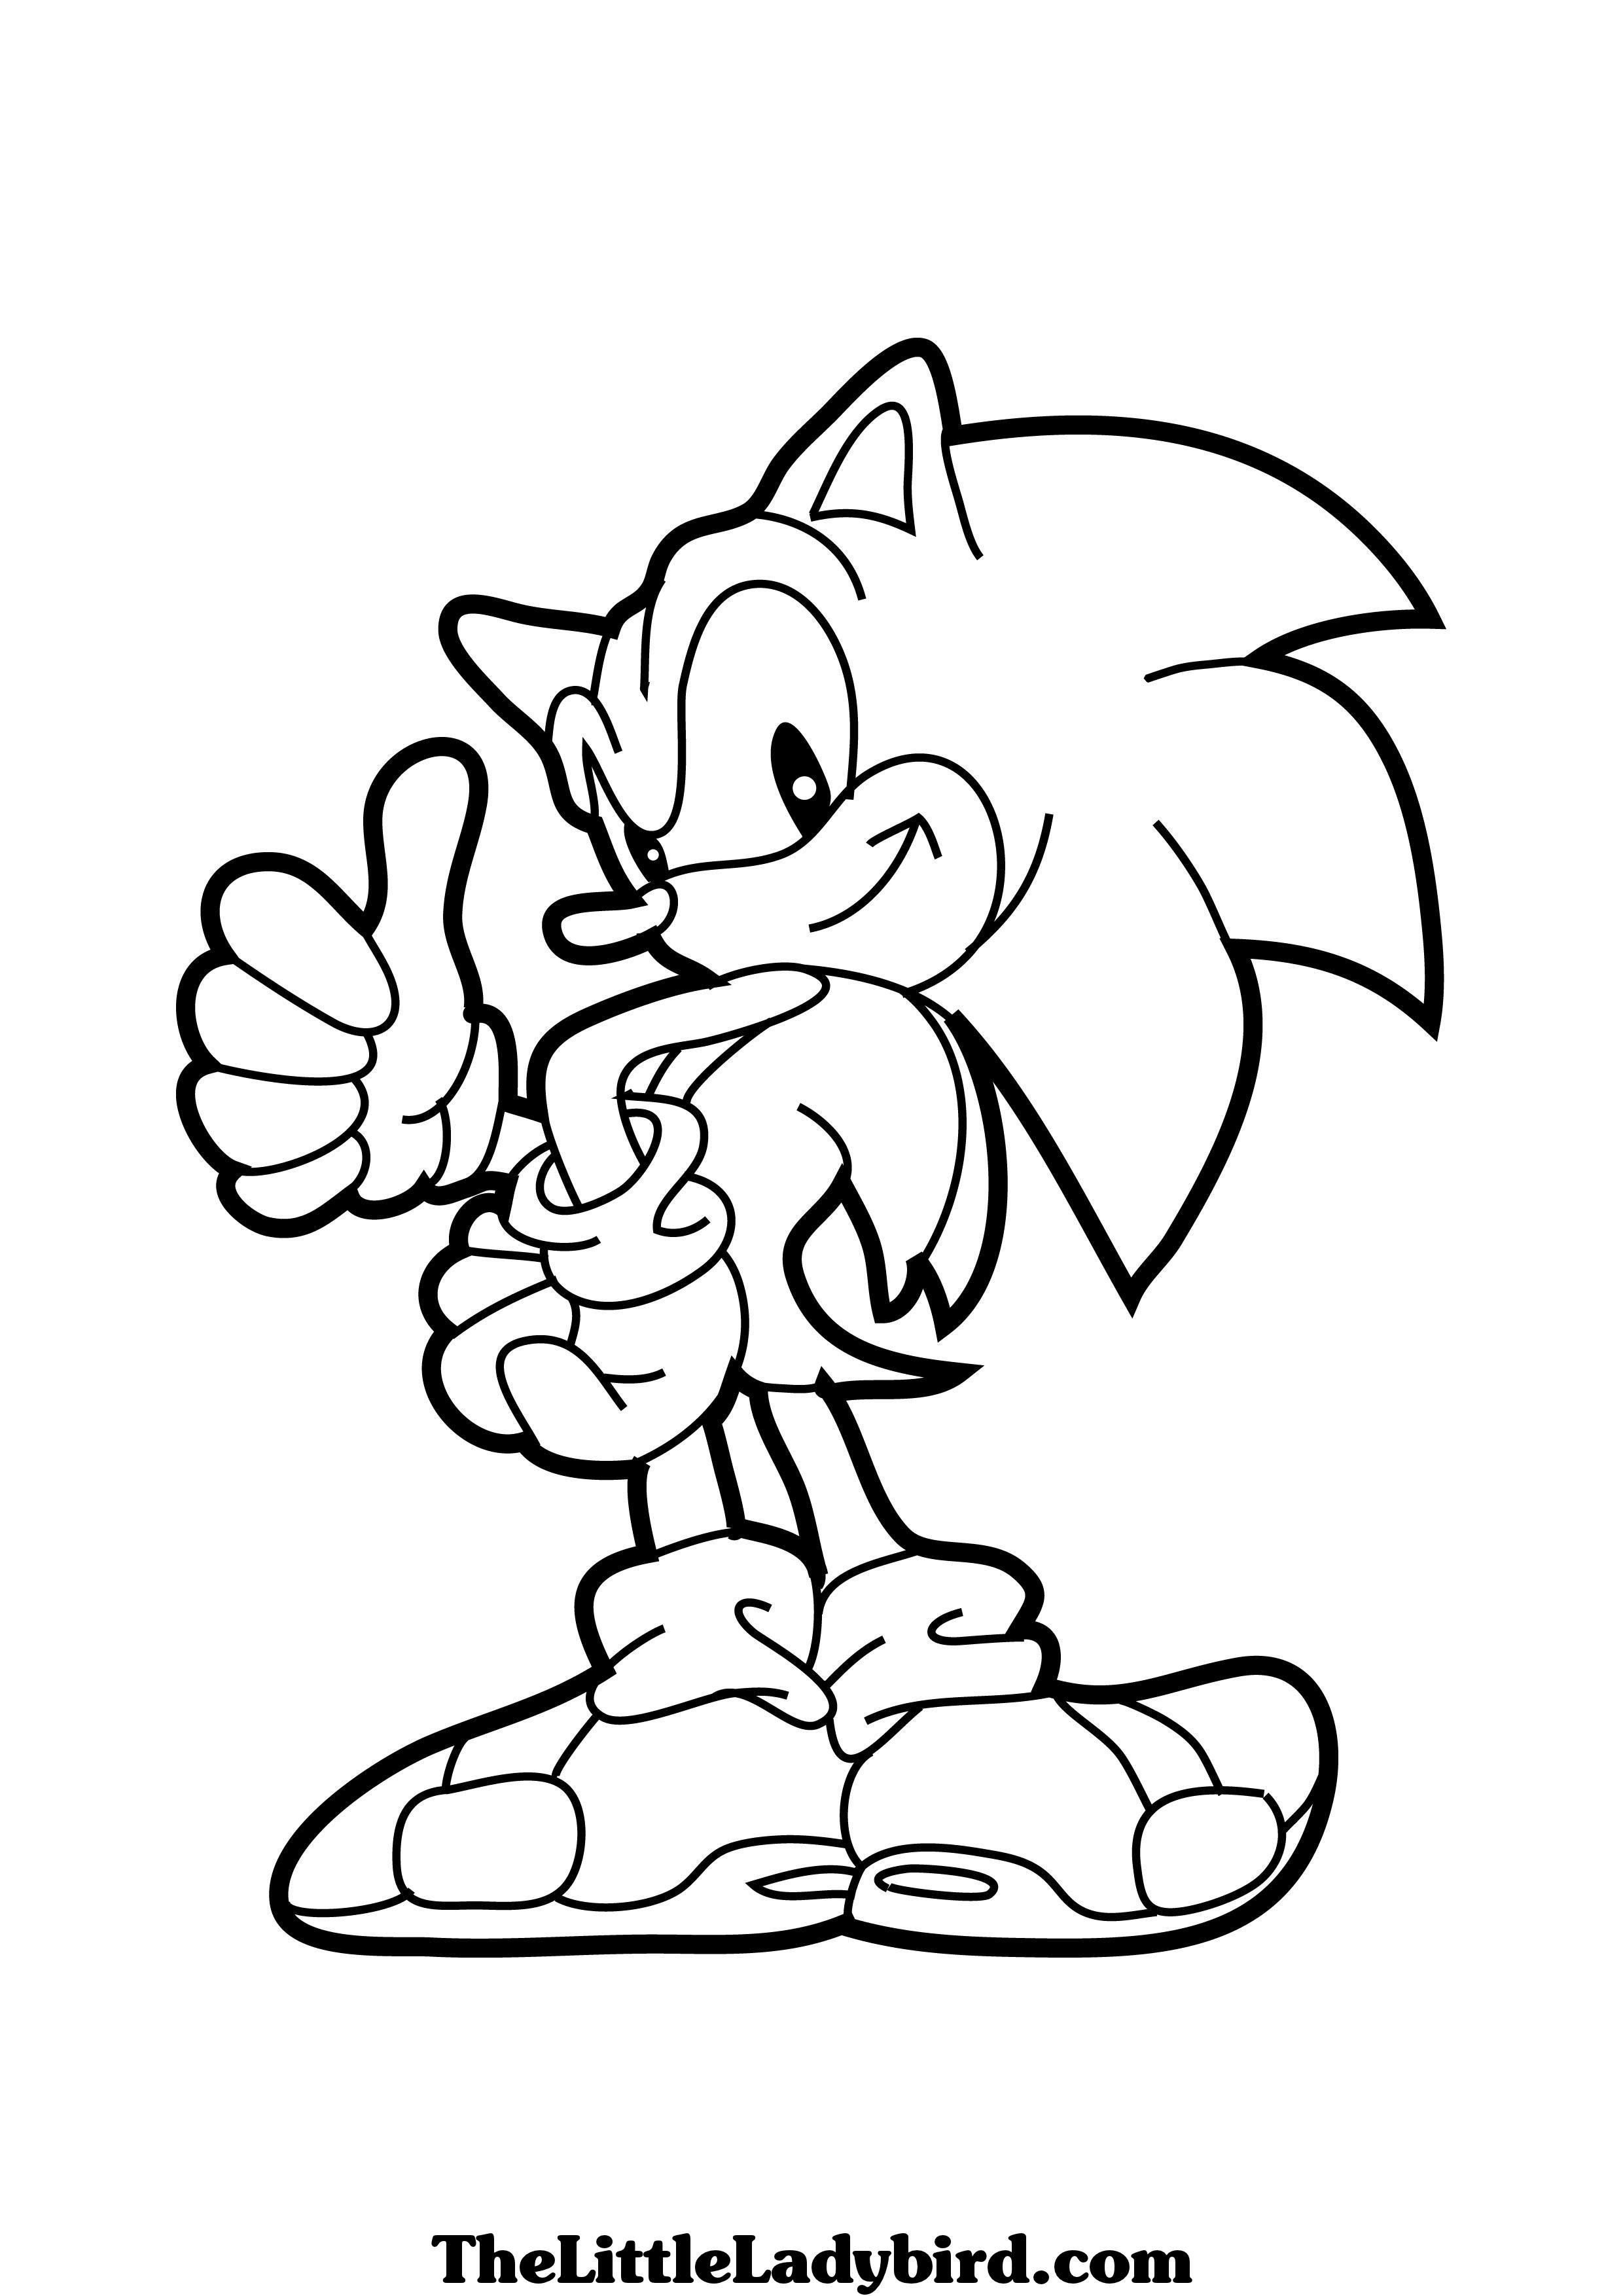  Sonic coloring pages | disney coloring pages for kids | color pages | coloring pages to print | kids coloring pages | #14